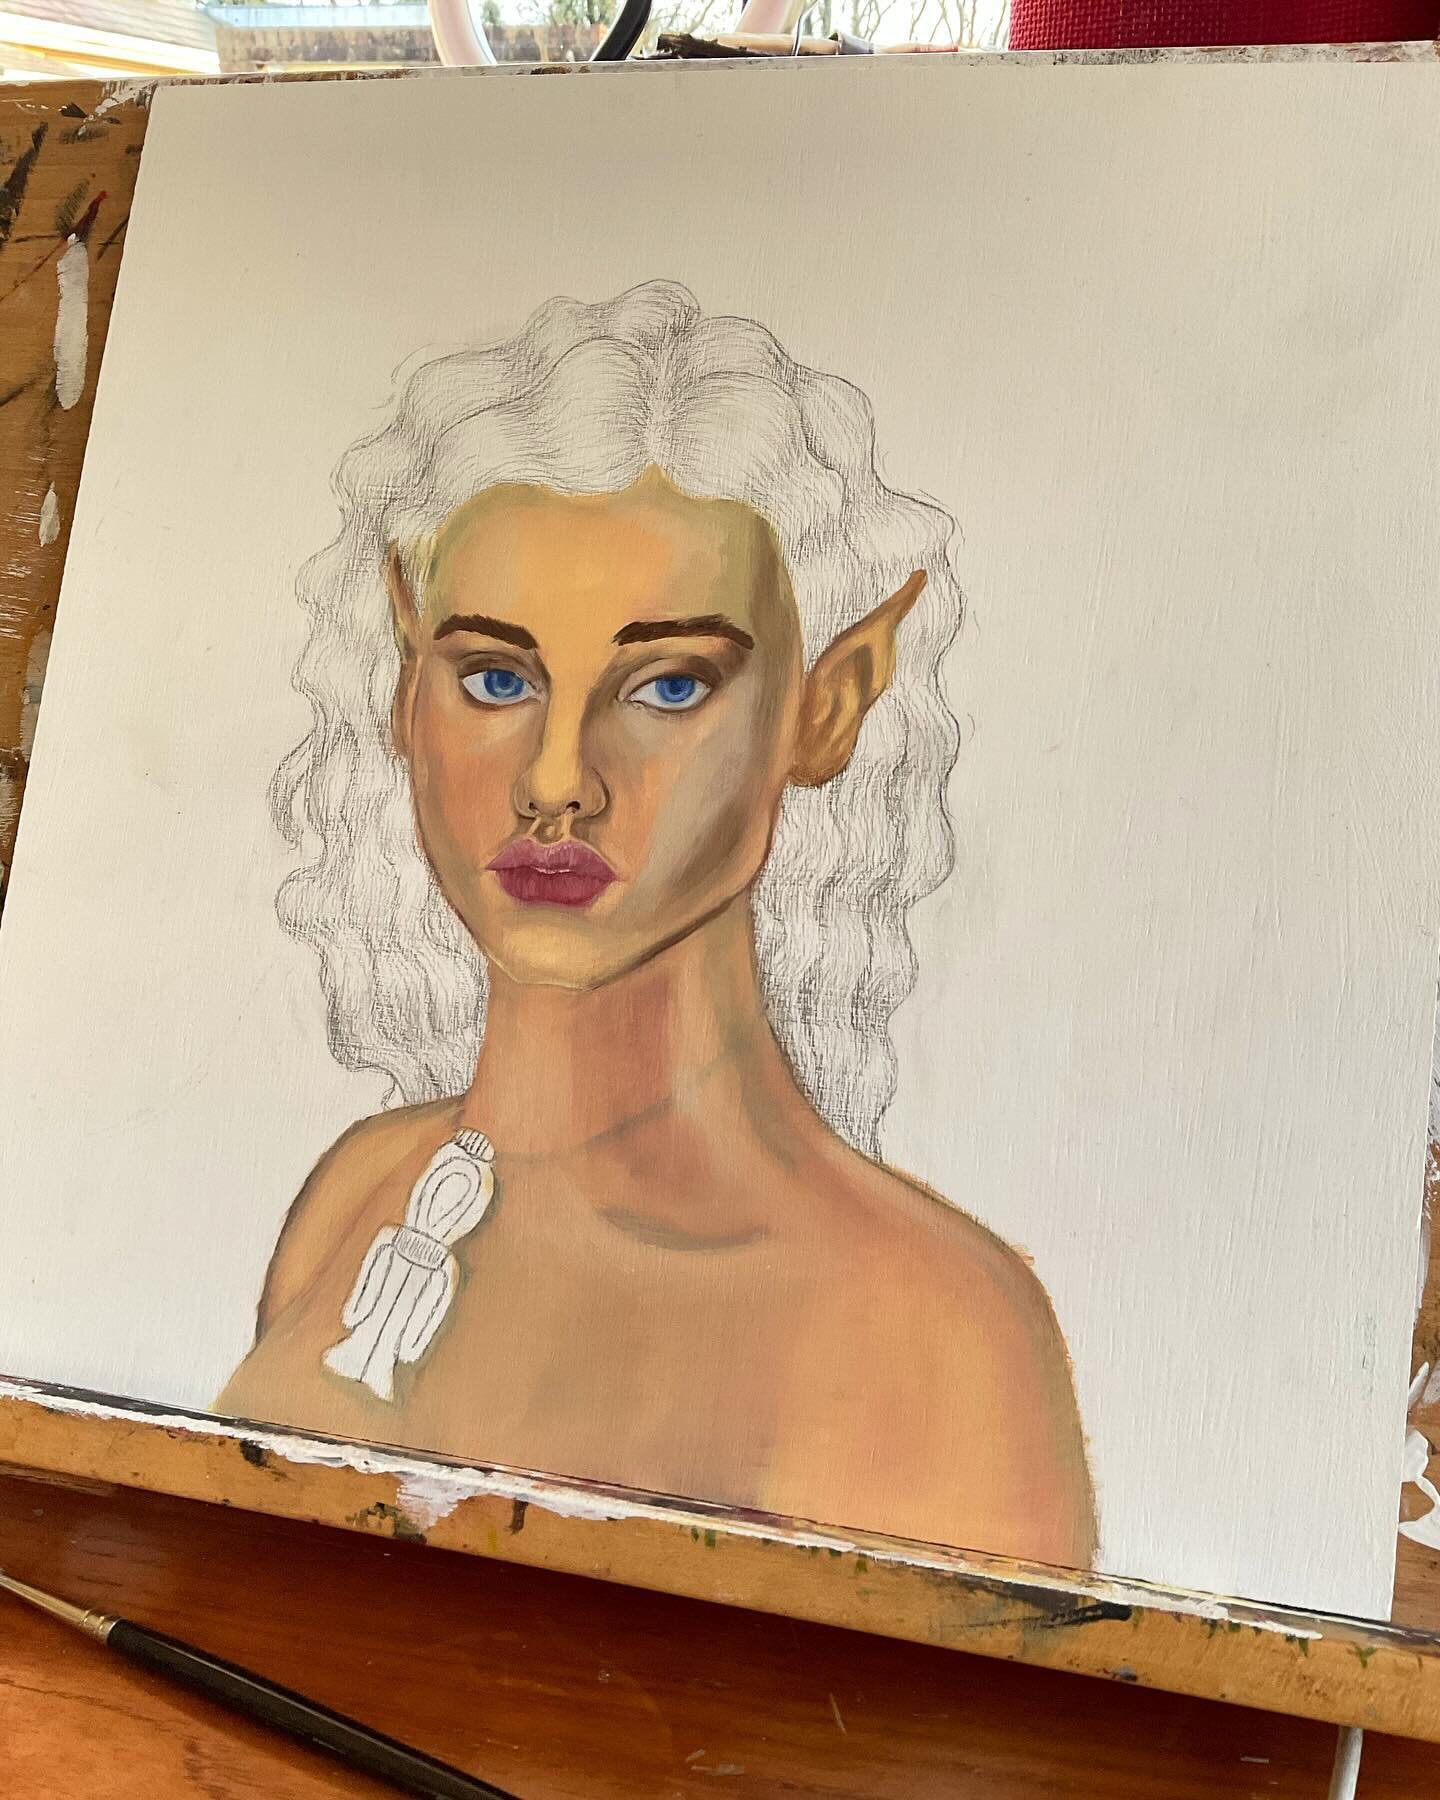 🌀A bit of the process of &ldquo;Tyet&rdquo; I&rsquo;ve been dealing with a lot of uncertainty inwards lately and painting is the only thing that makes sense, or does it? 

🤹🏽&zwj;♀️I feel like the first layers of this painting were just an attempt